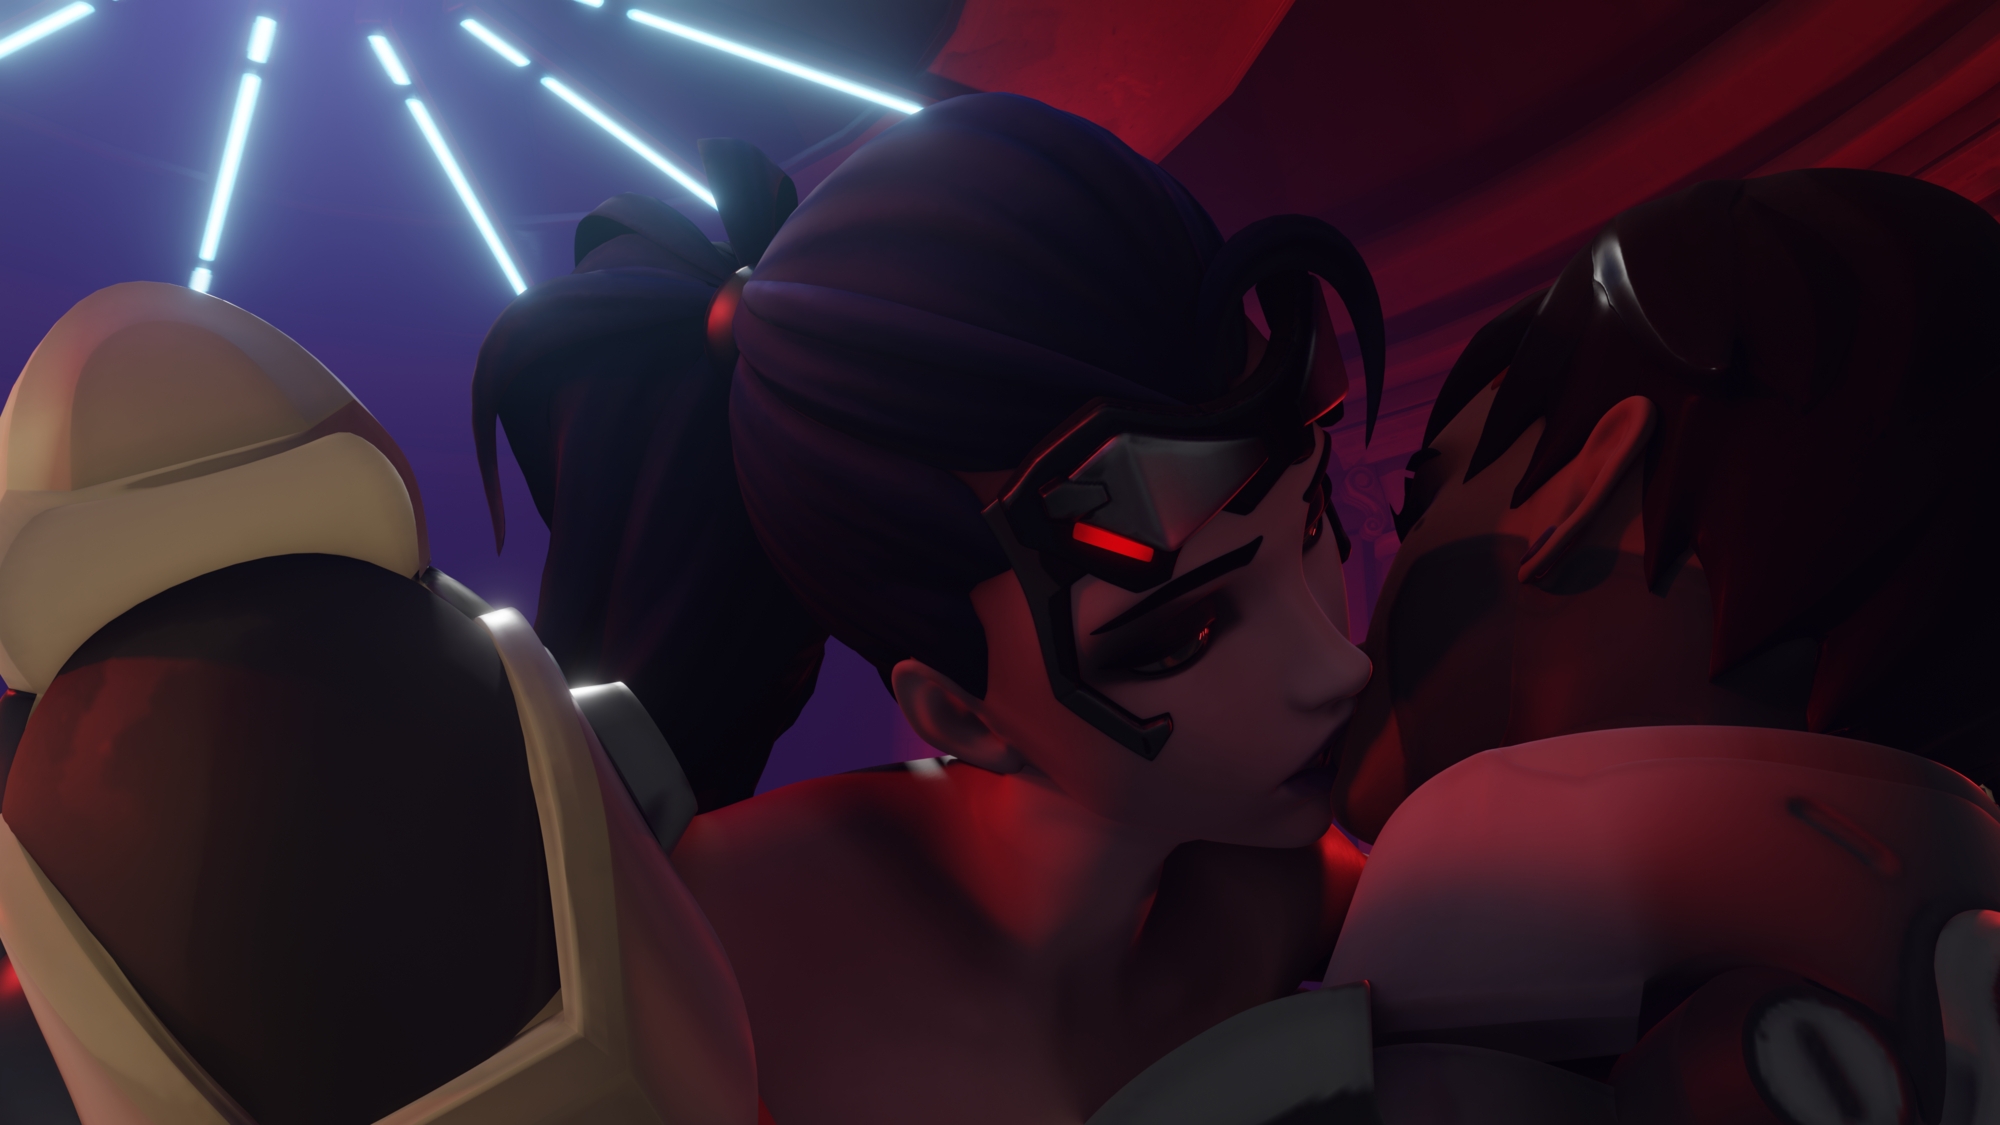 Sombra and Widowmaker Talon girls are making some horny time Sombra (overwatch) Widowmaker Overwatch  3